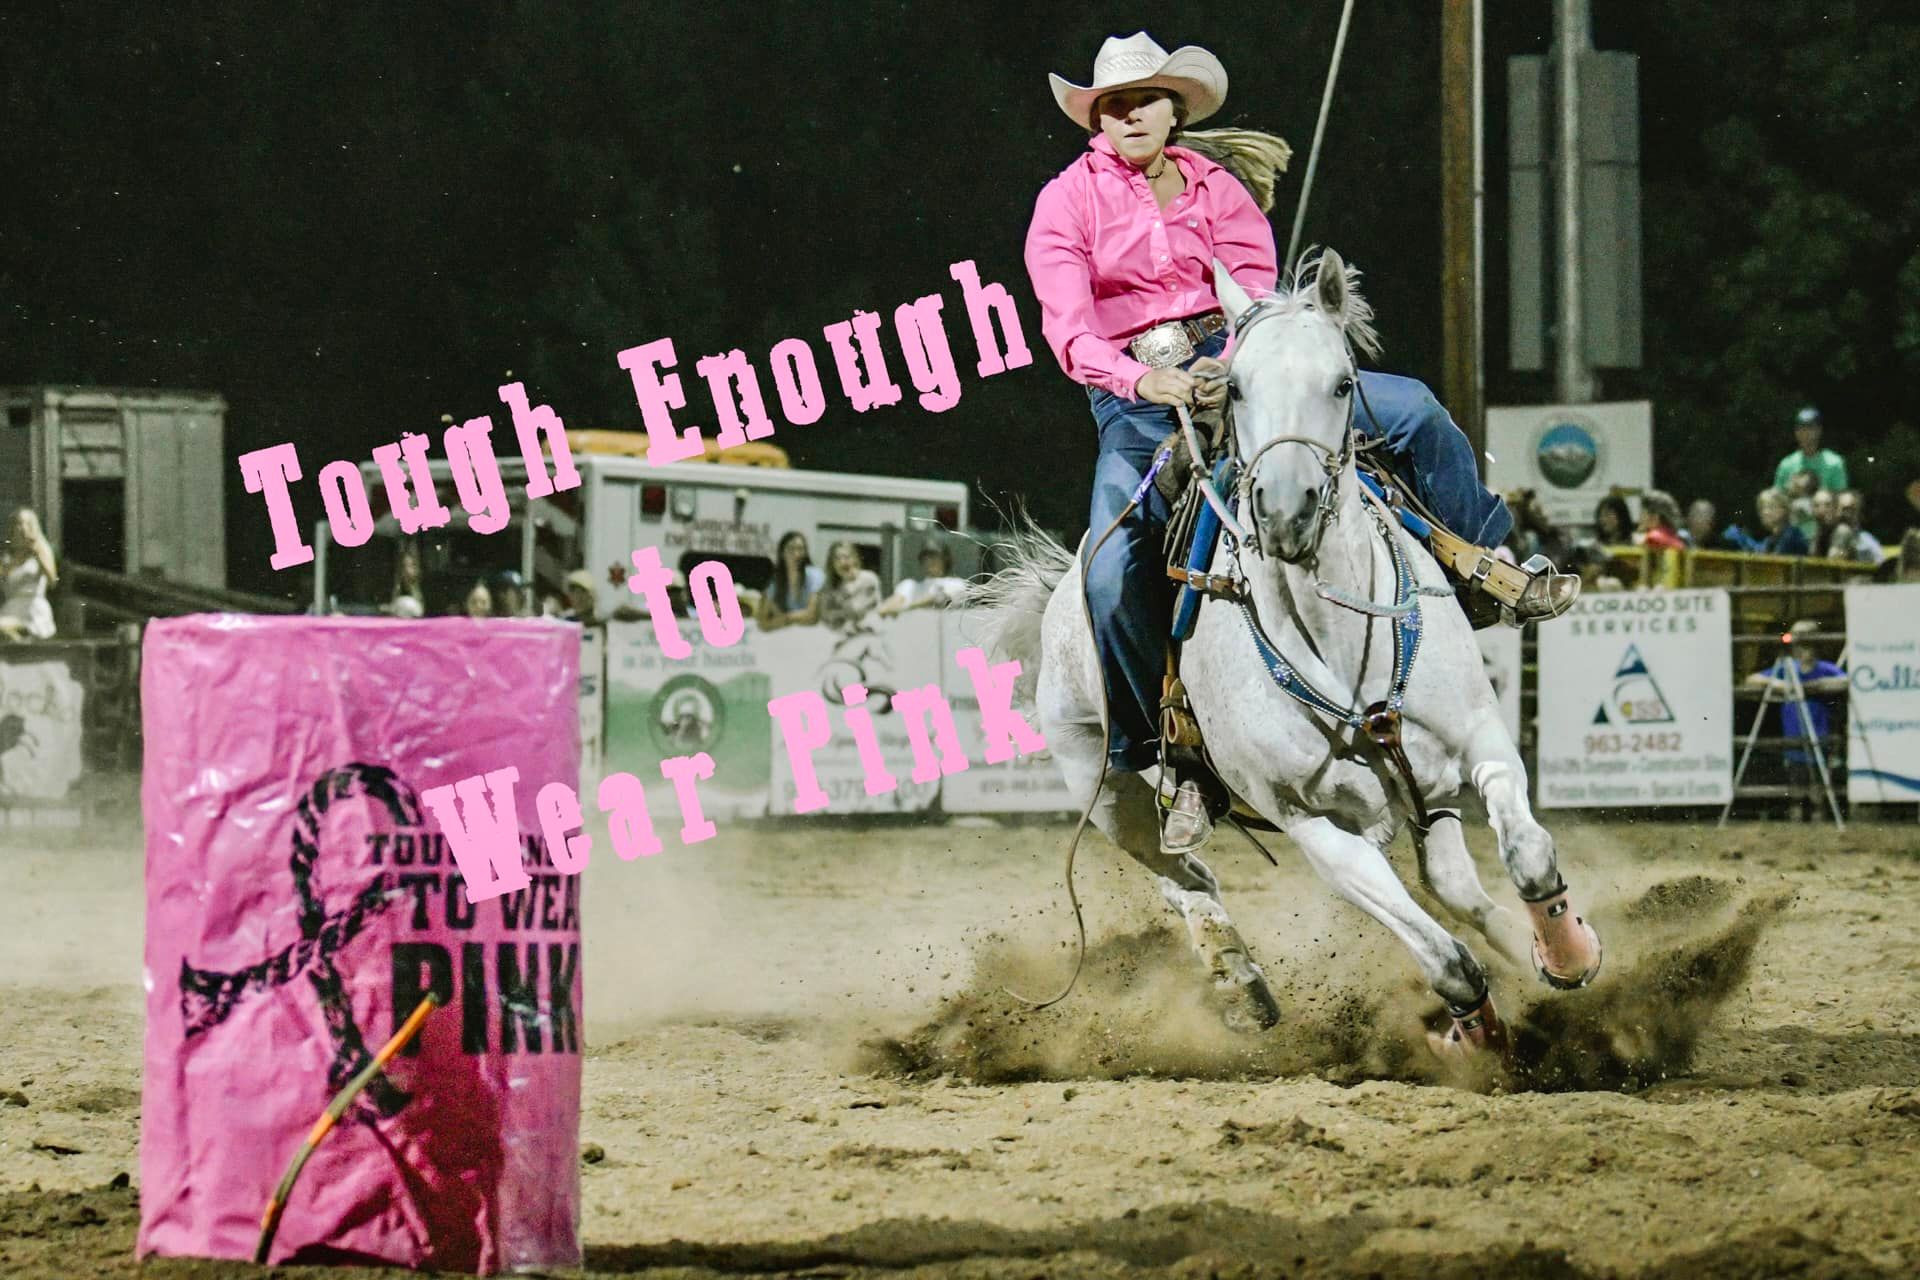 July 14 - Tough Enough to Wear Pink - Carbondale Wild West Rodeo